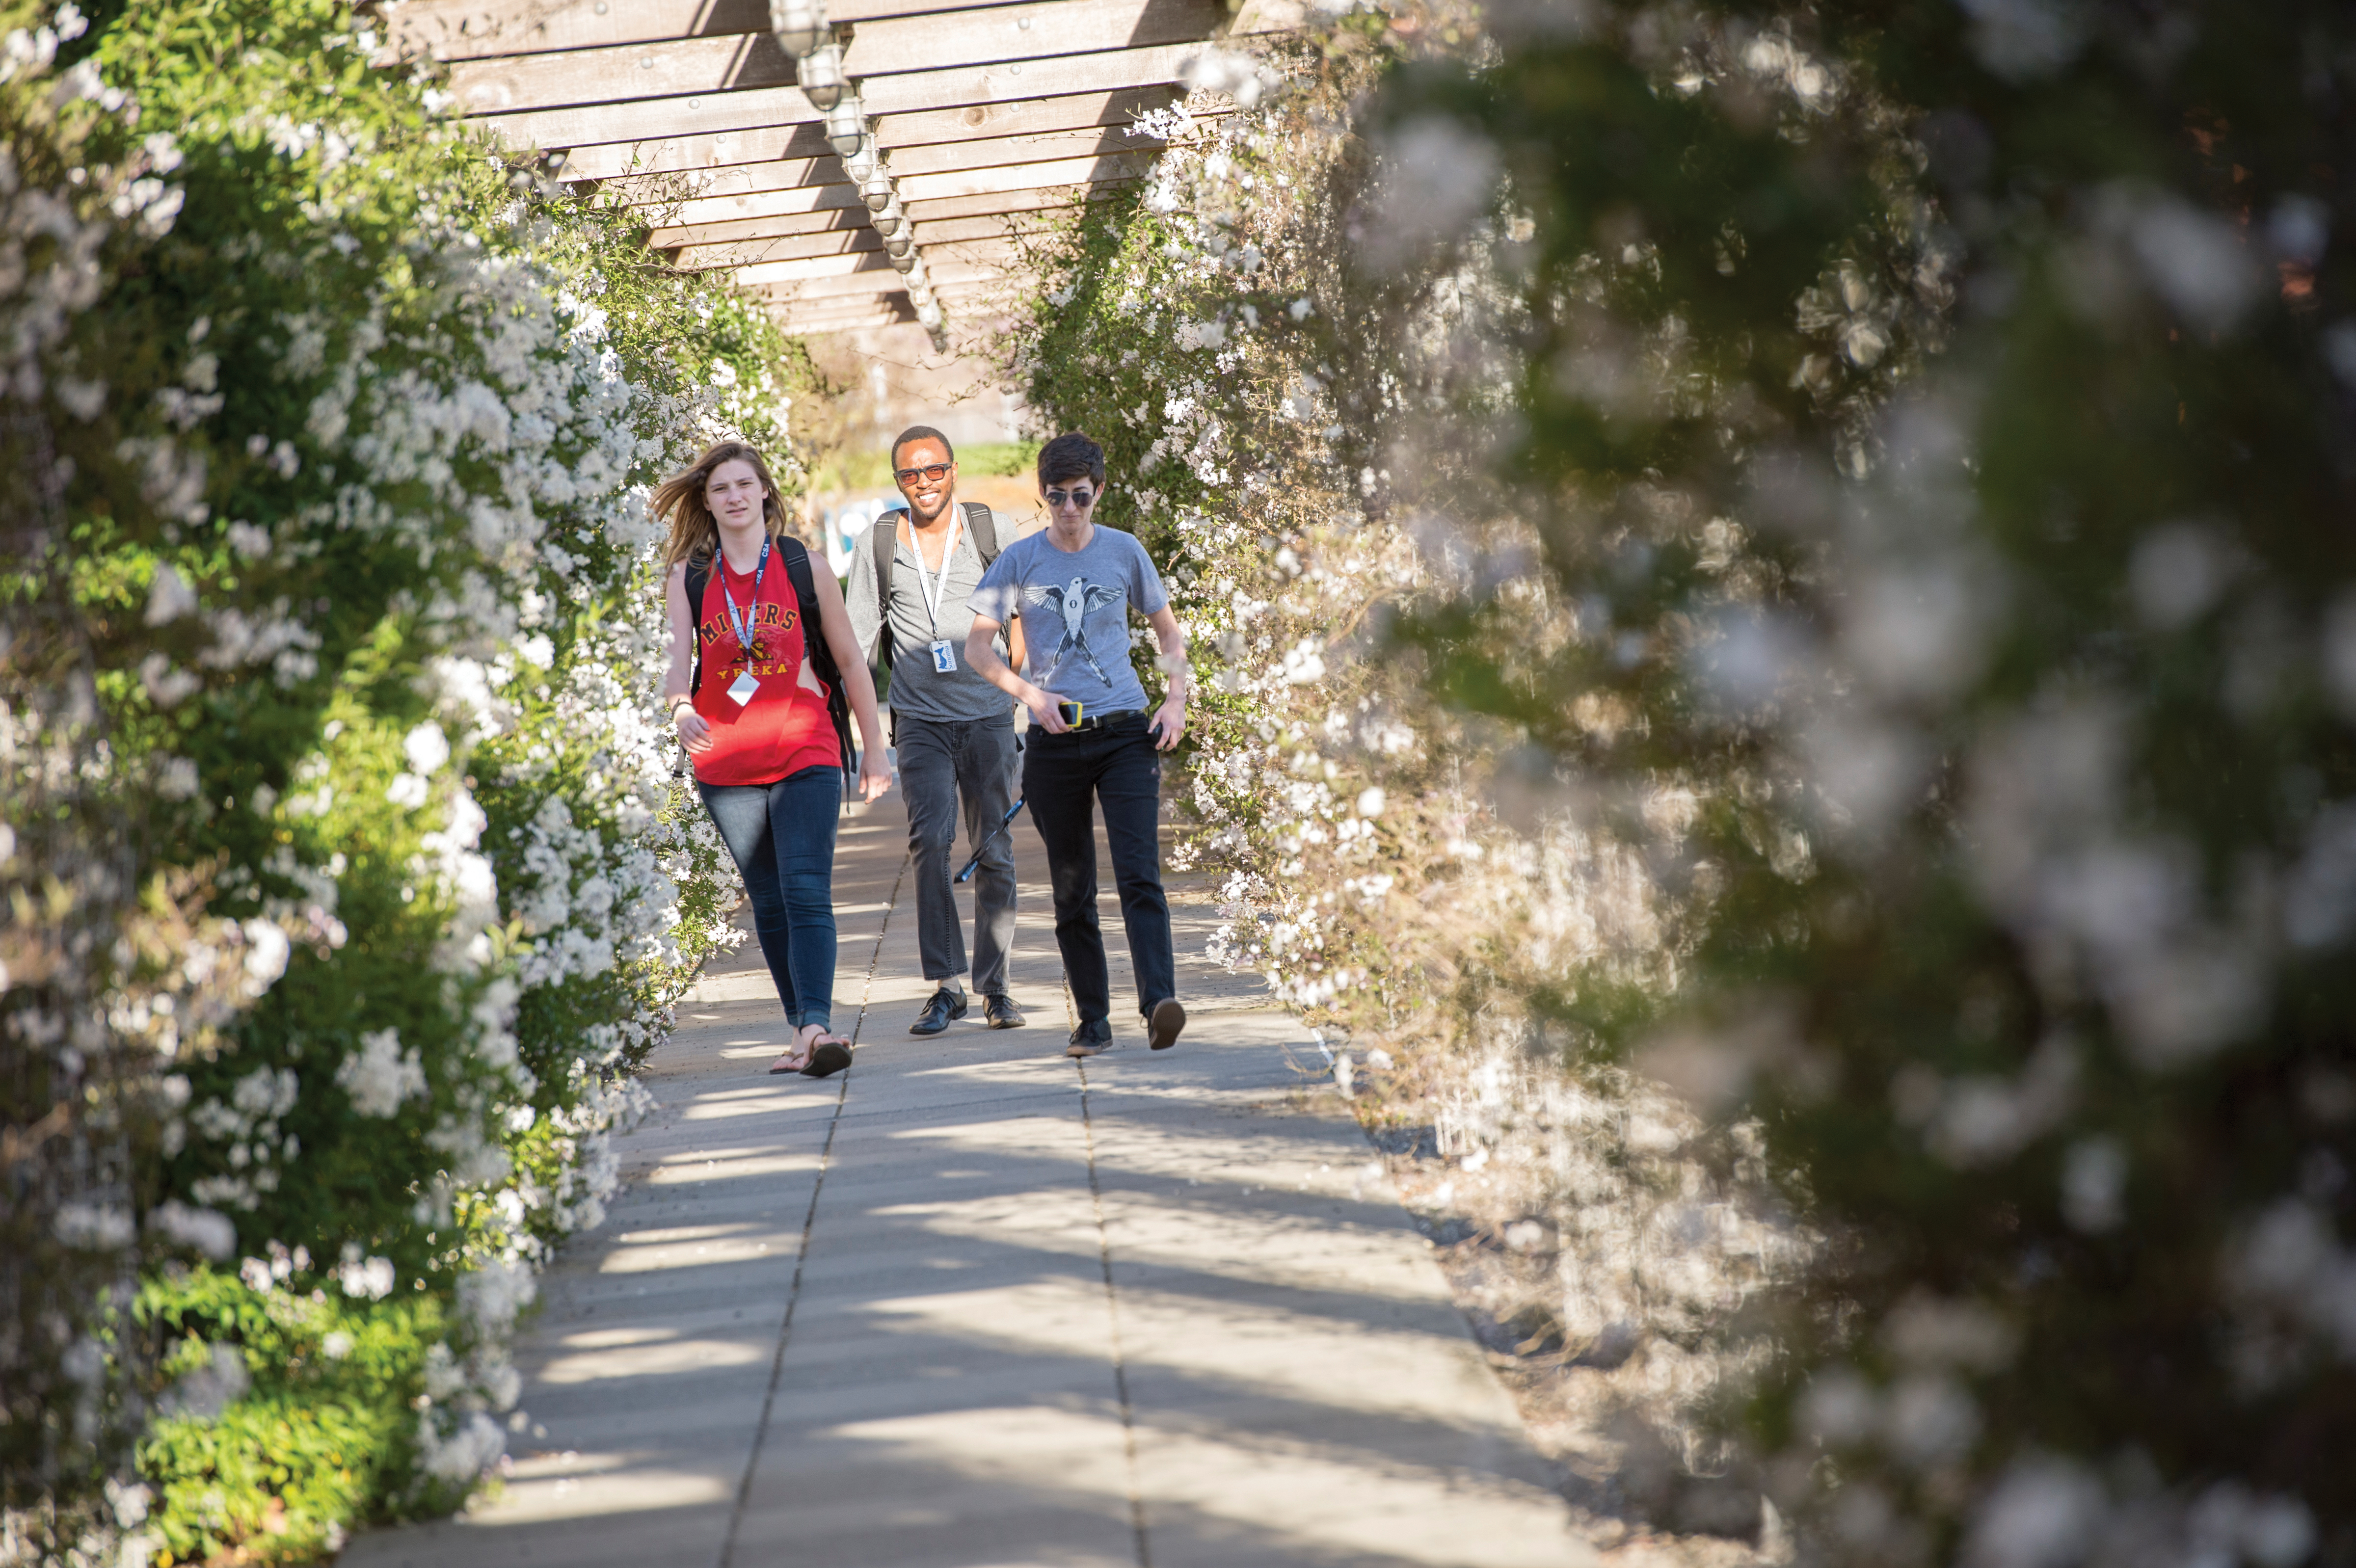 Three students walk through a trellised path bordered by hedges of green leaves and white flowers